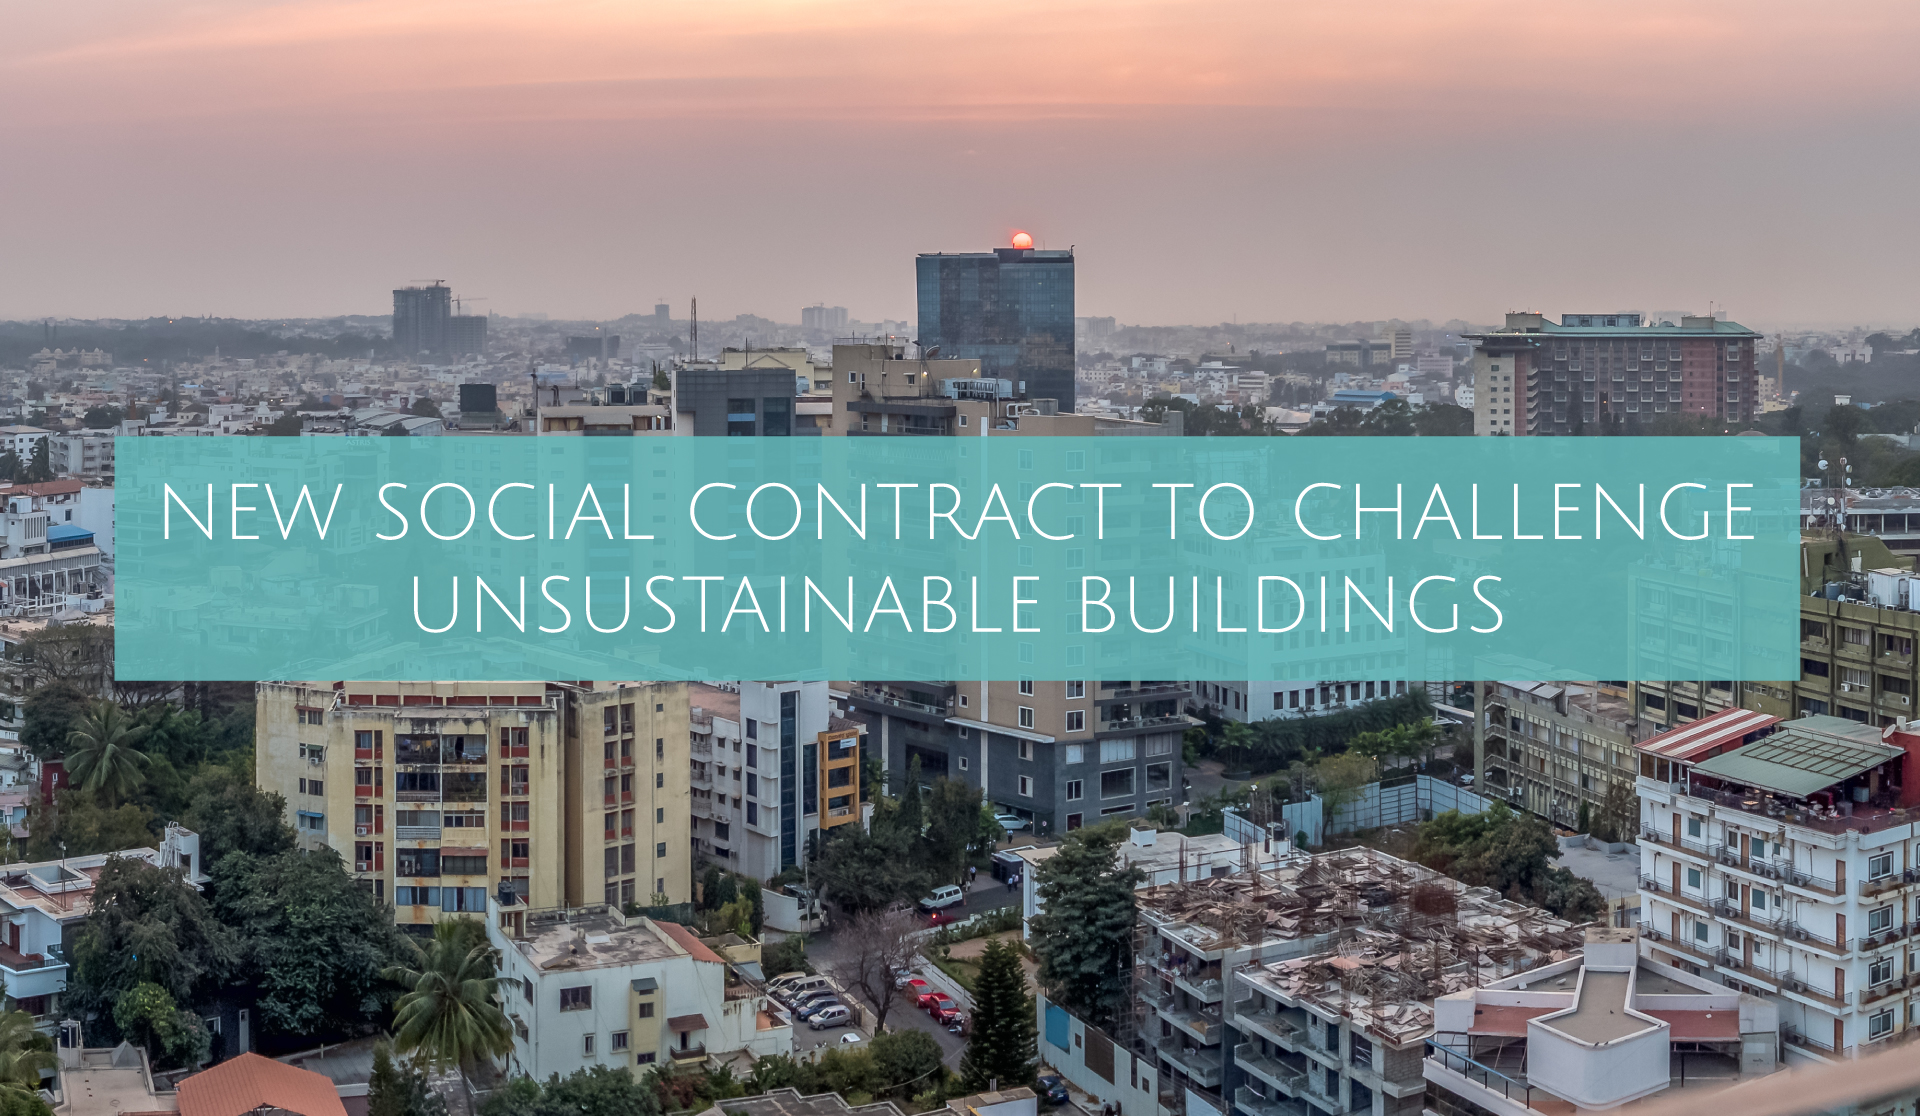 New social contract to challenge unsustainable buildings